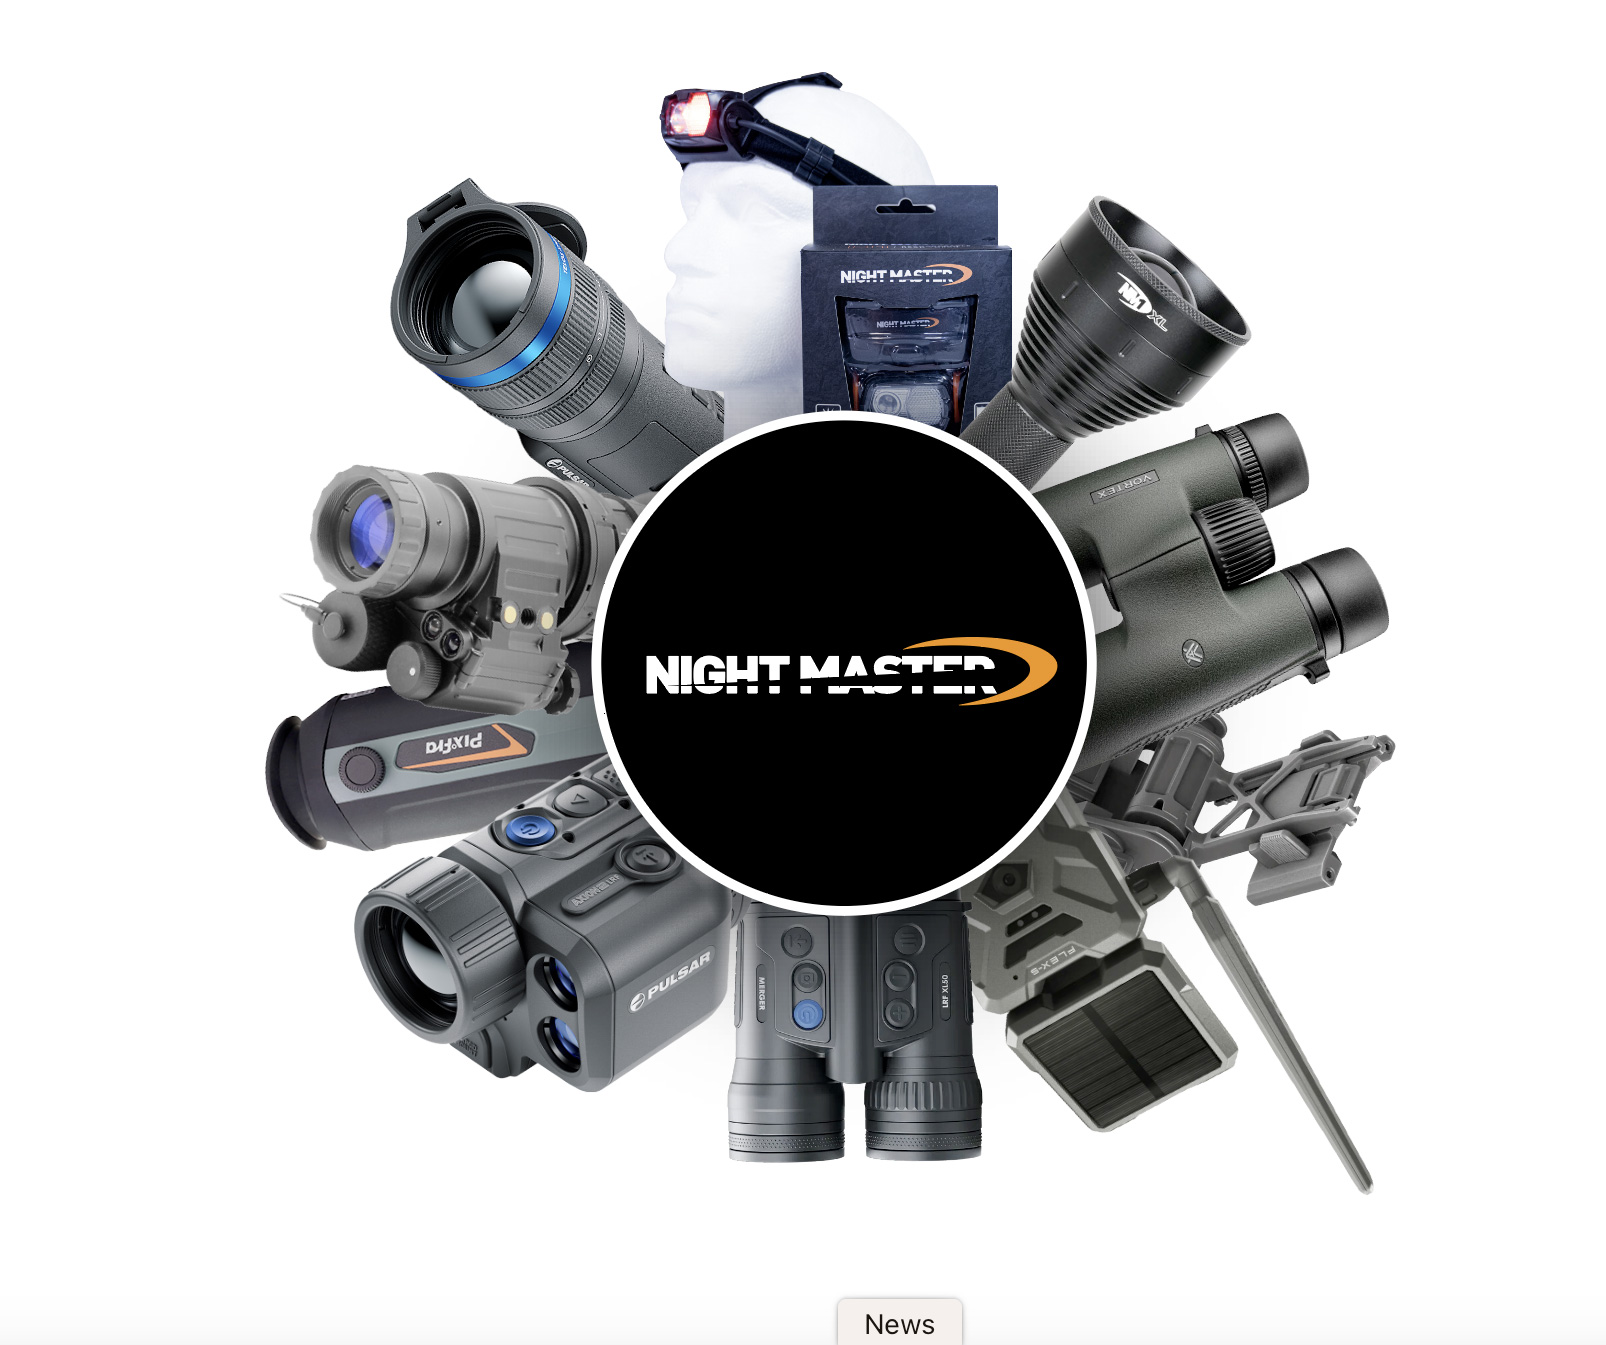 Night Master for Torches, night vision and Thermal Imaging